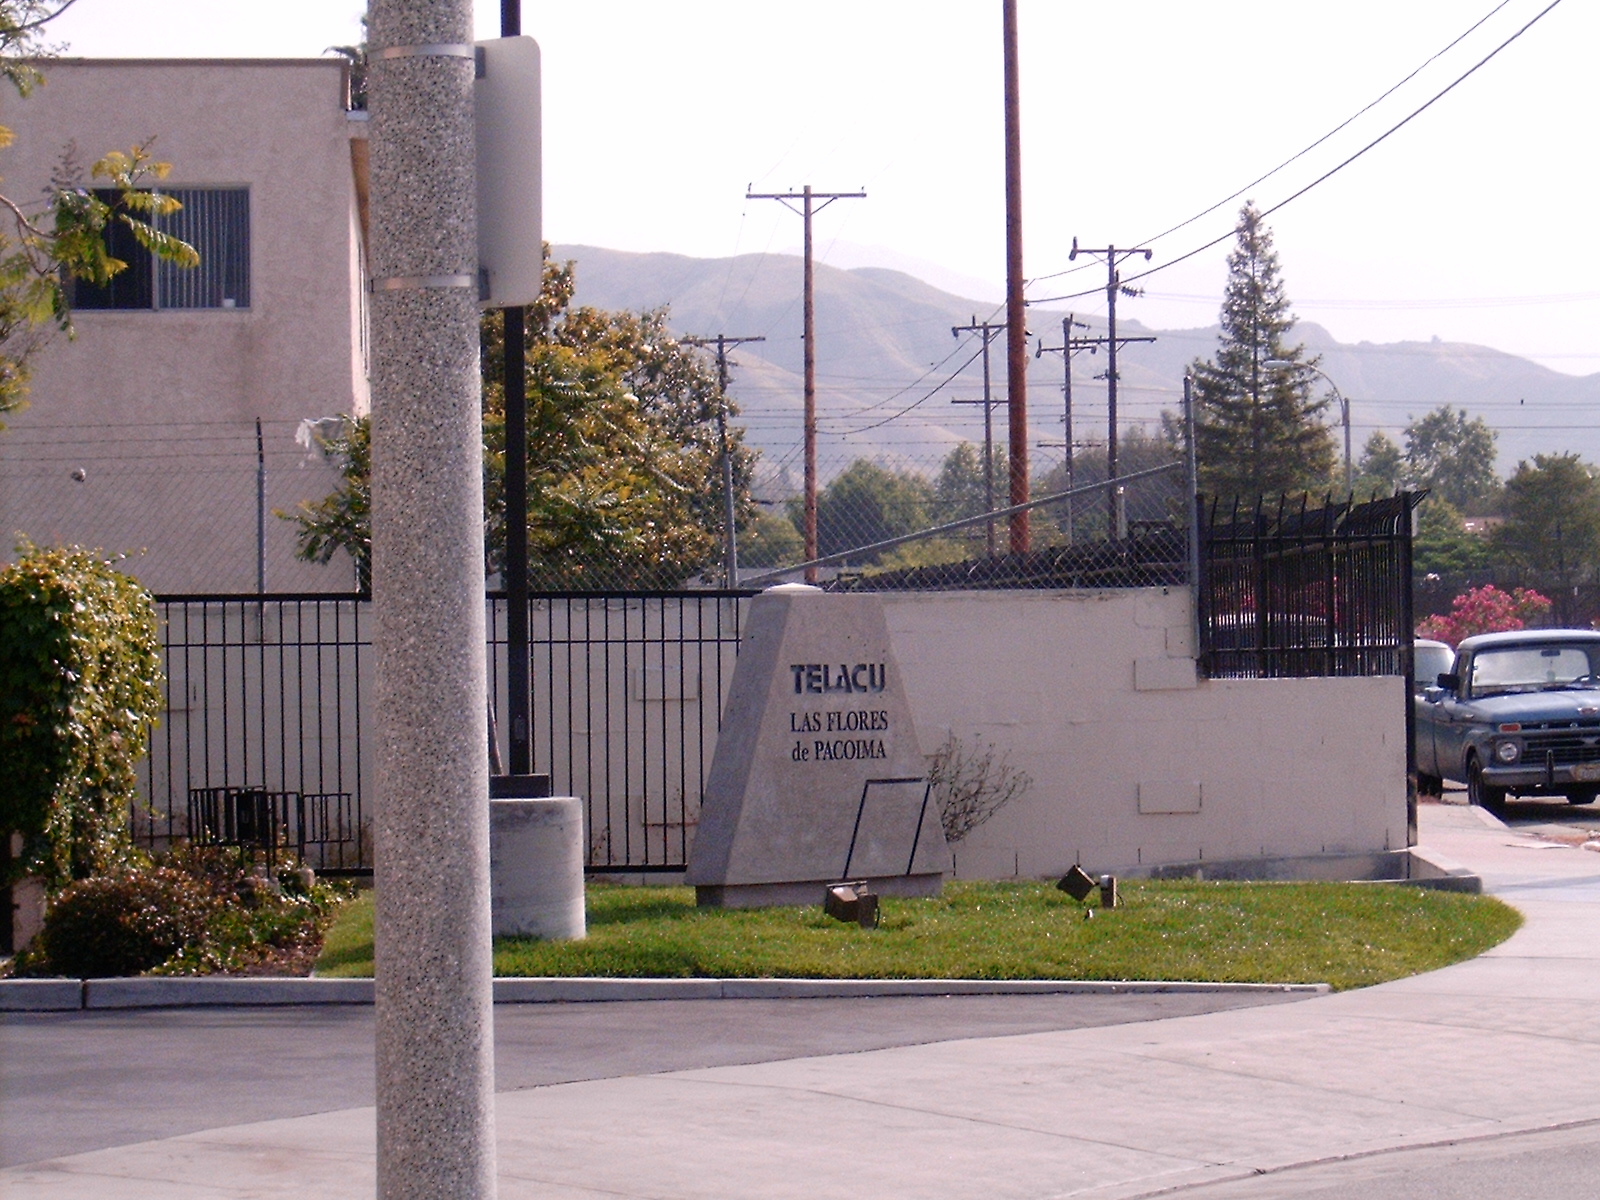 Corner view of the building, concrete standing stone with the building's name "Telacu Las Flores de Pacoima", old blue parked truck, grass and plants in front of the gated building.